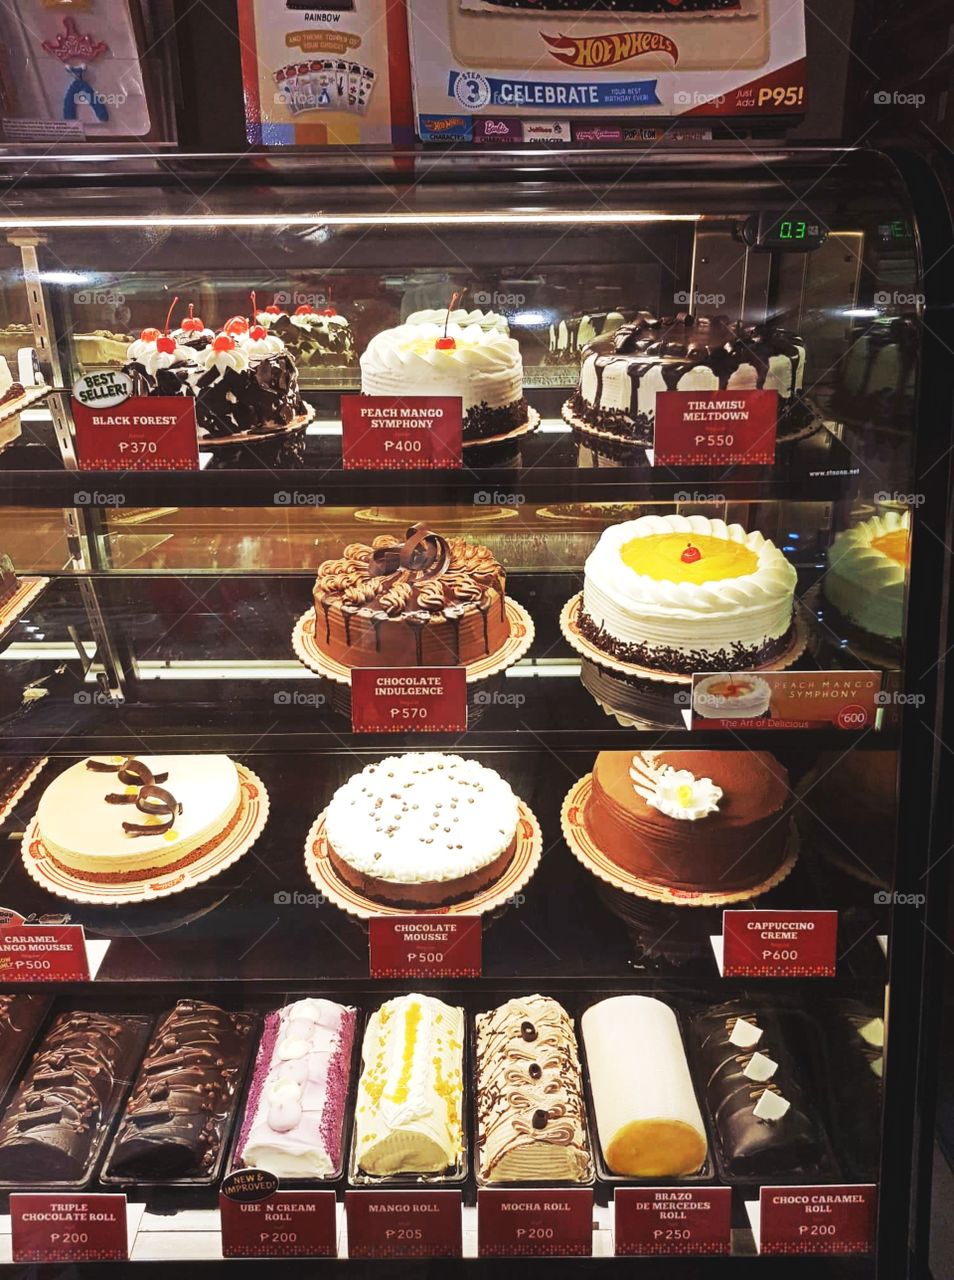 Mouth-watering selections of round cakes that come with different sizes and designs.